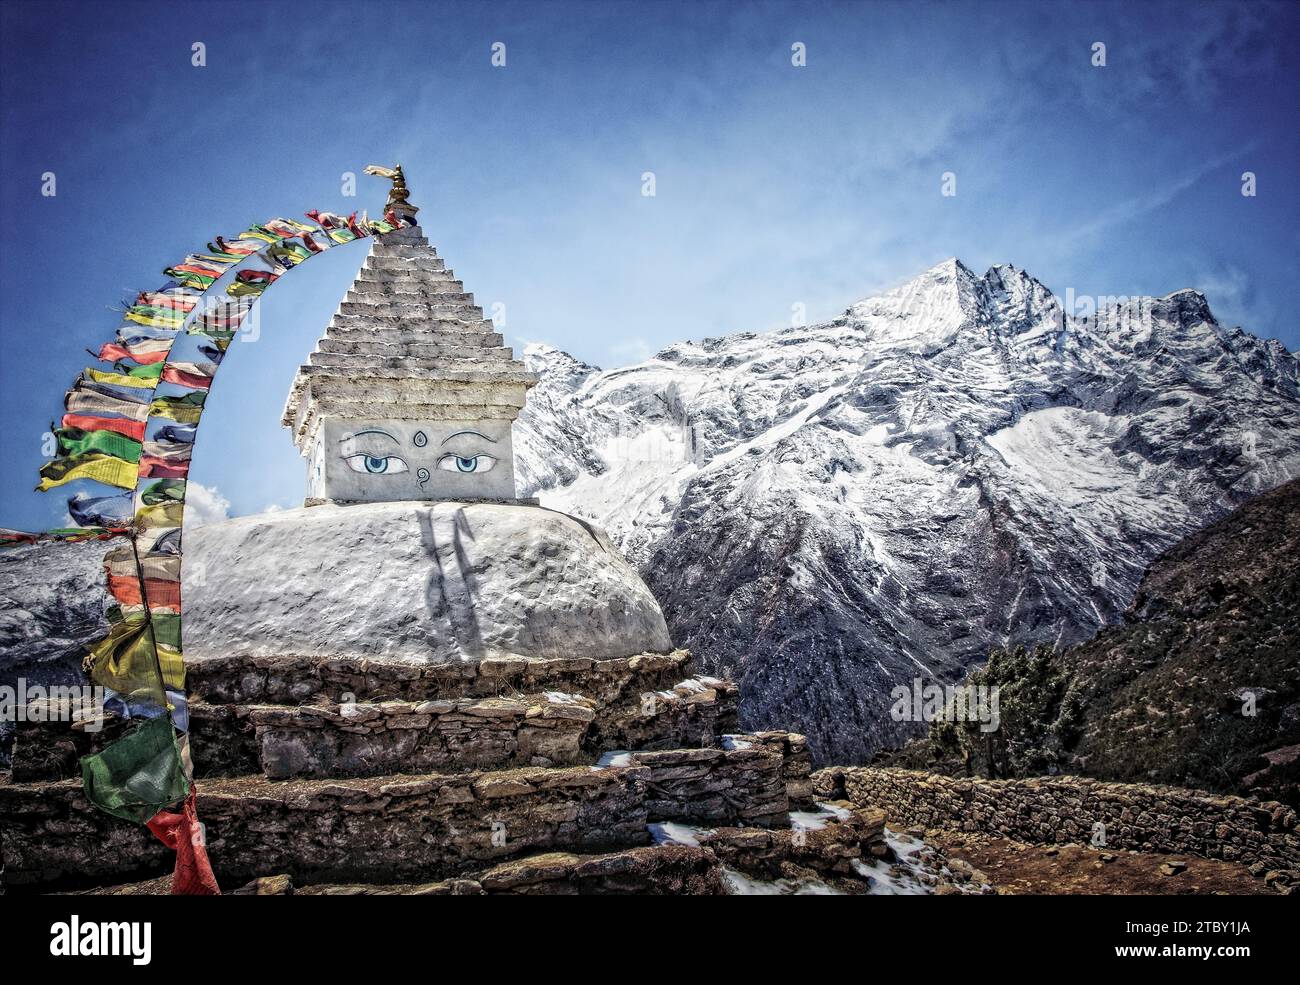 A stupa sits above the town of Namche with Kongde towering in the backgroud, Nepal. Stock Photo